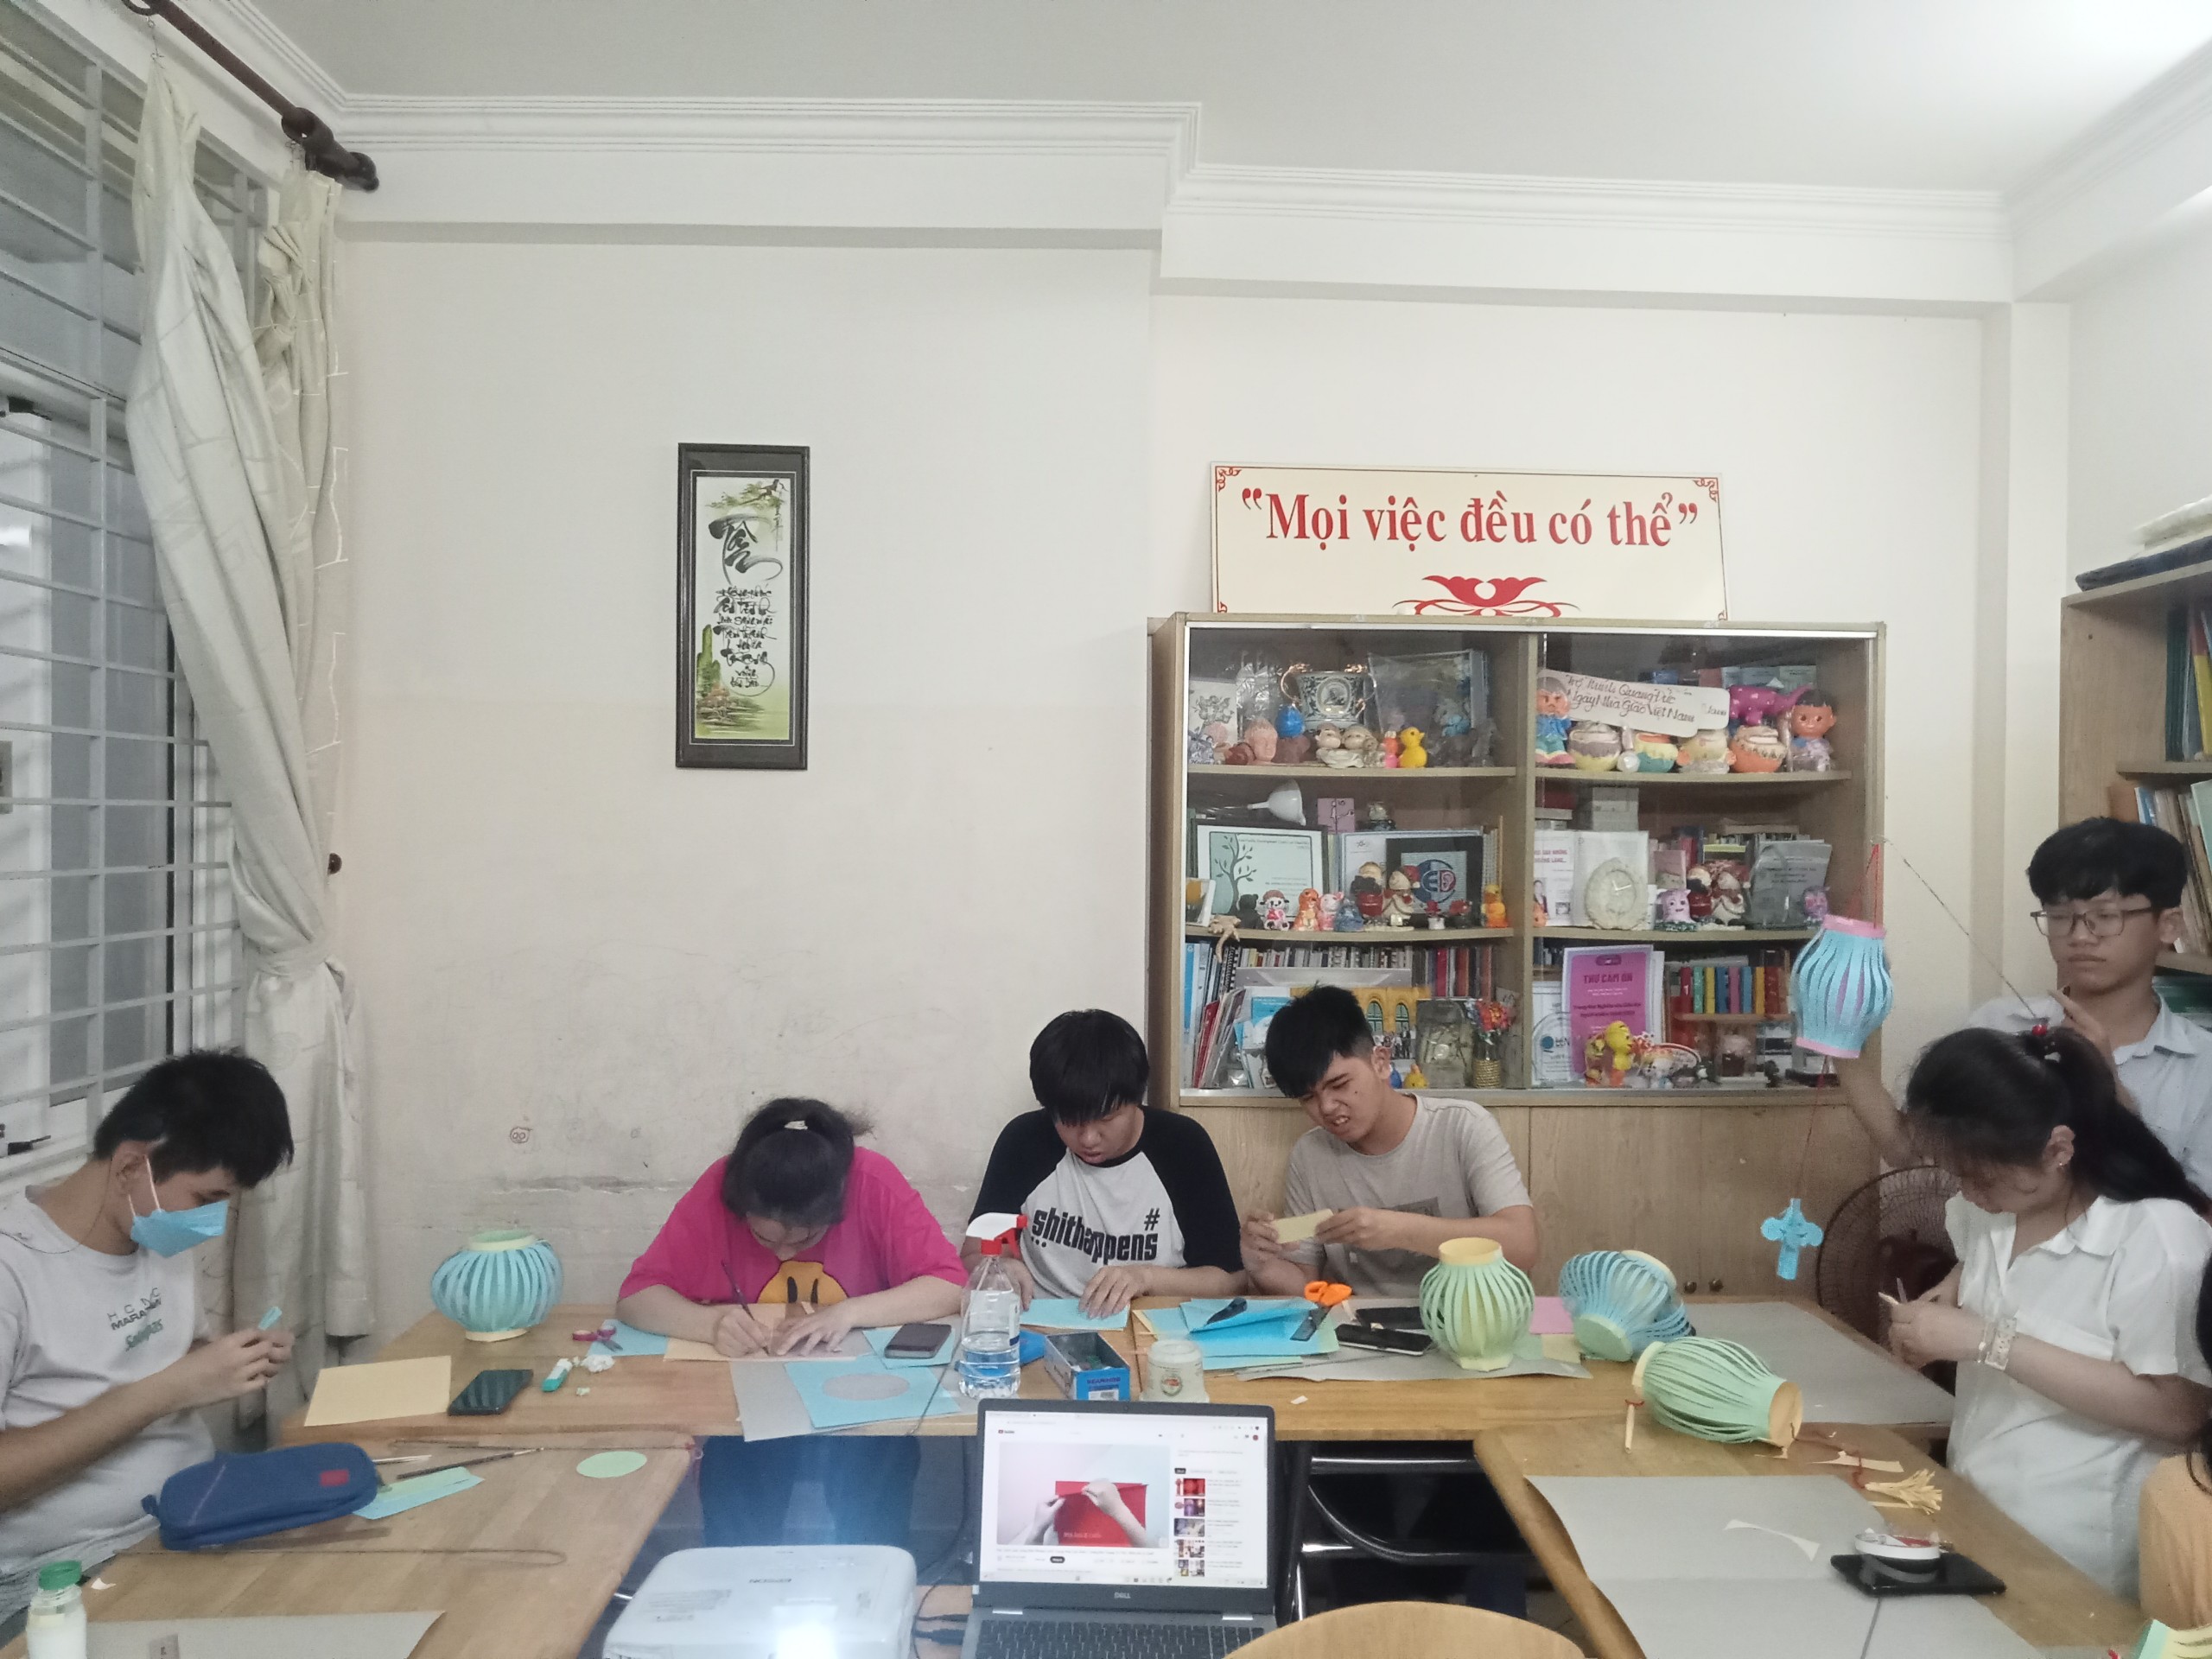 EXTRACURRICULAR SESSION – MAKING LANTERNS